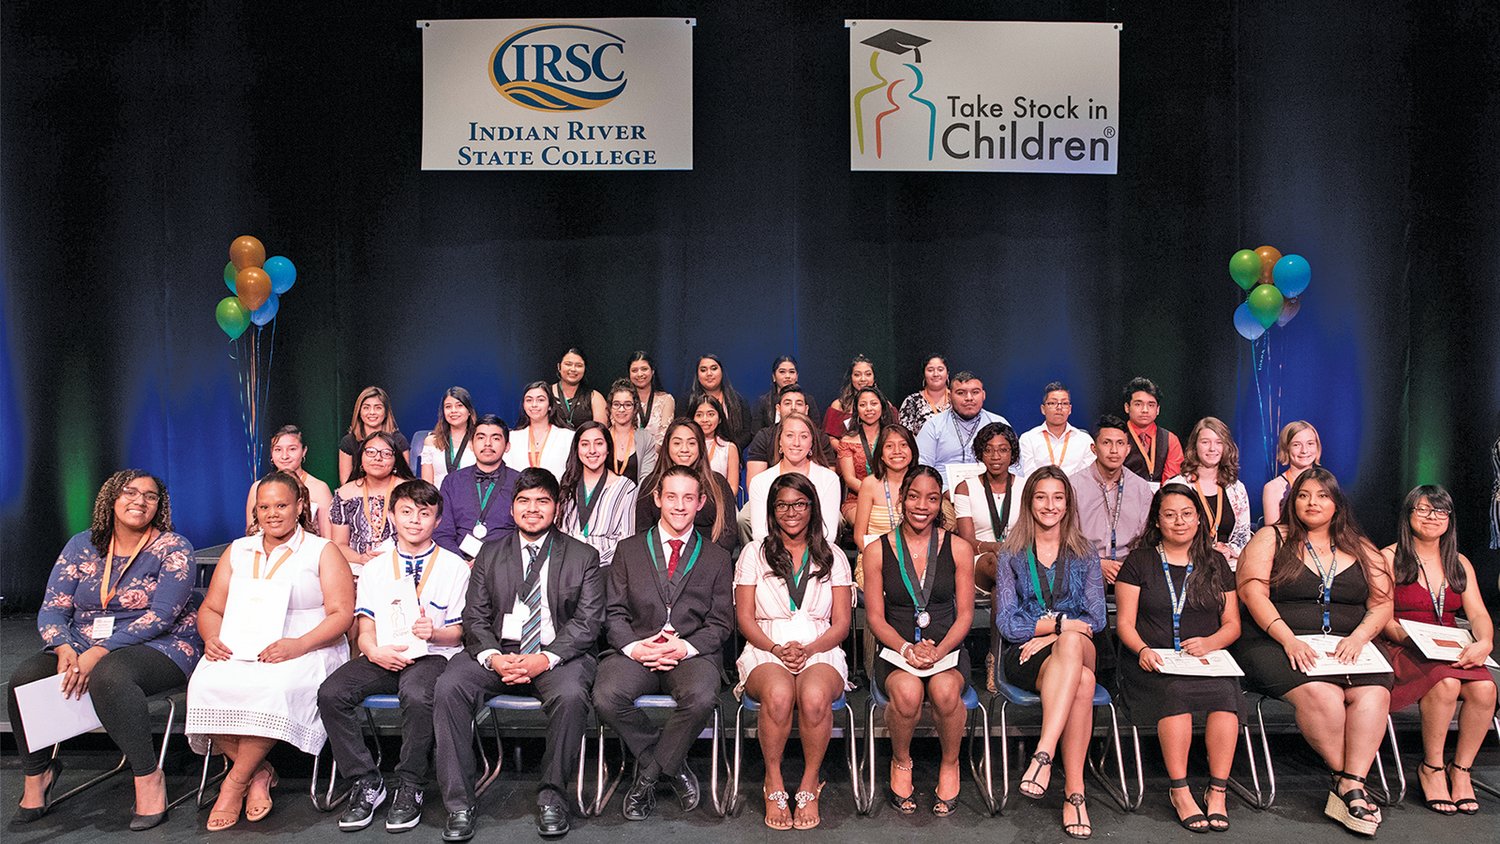 Pictured is the 2019 recipients for the Take Stock in Children award.